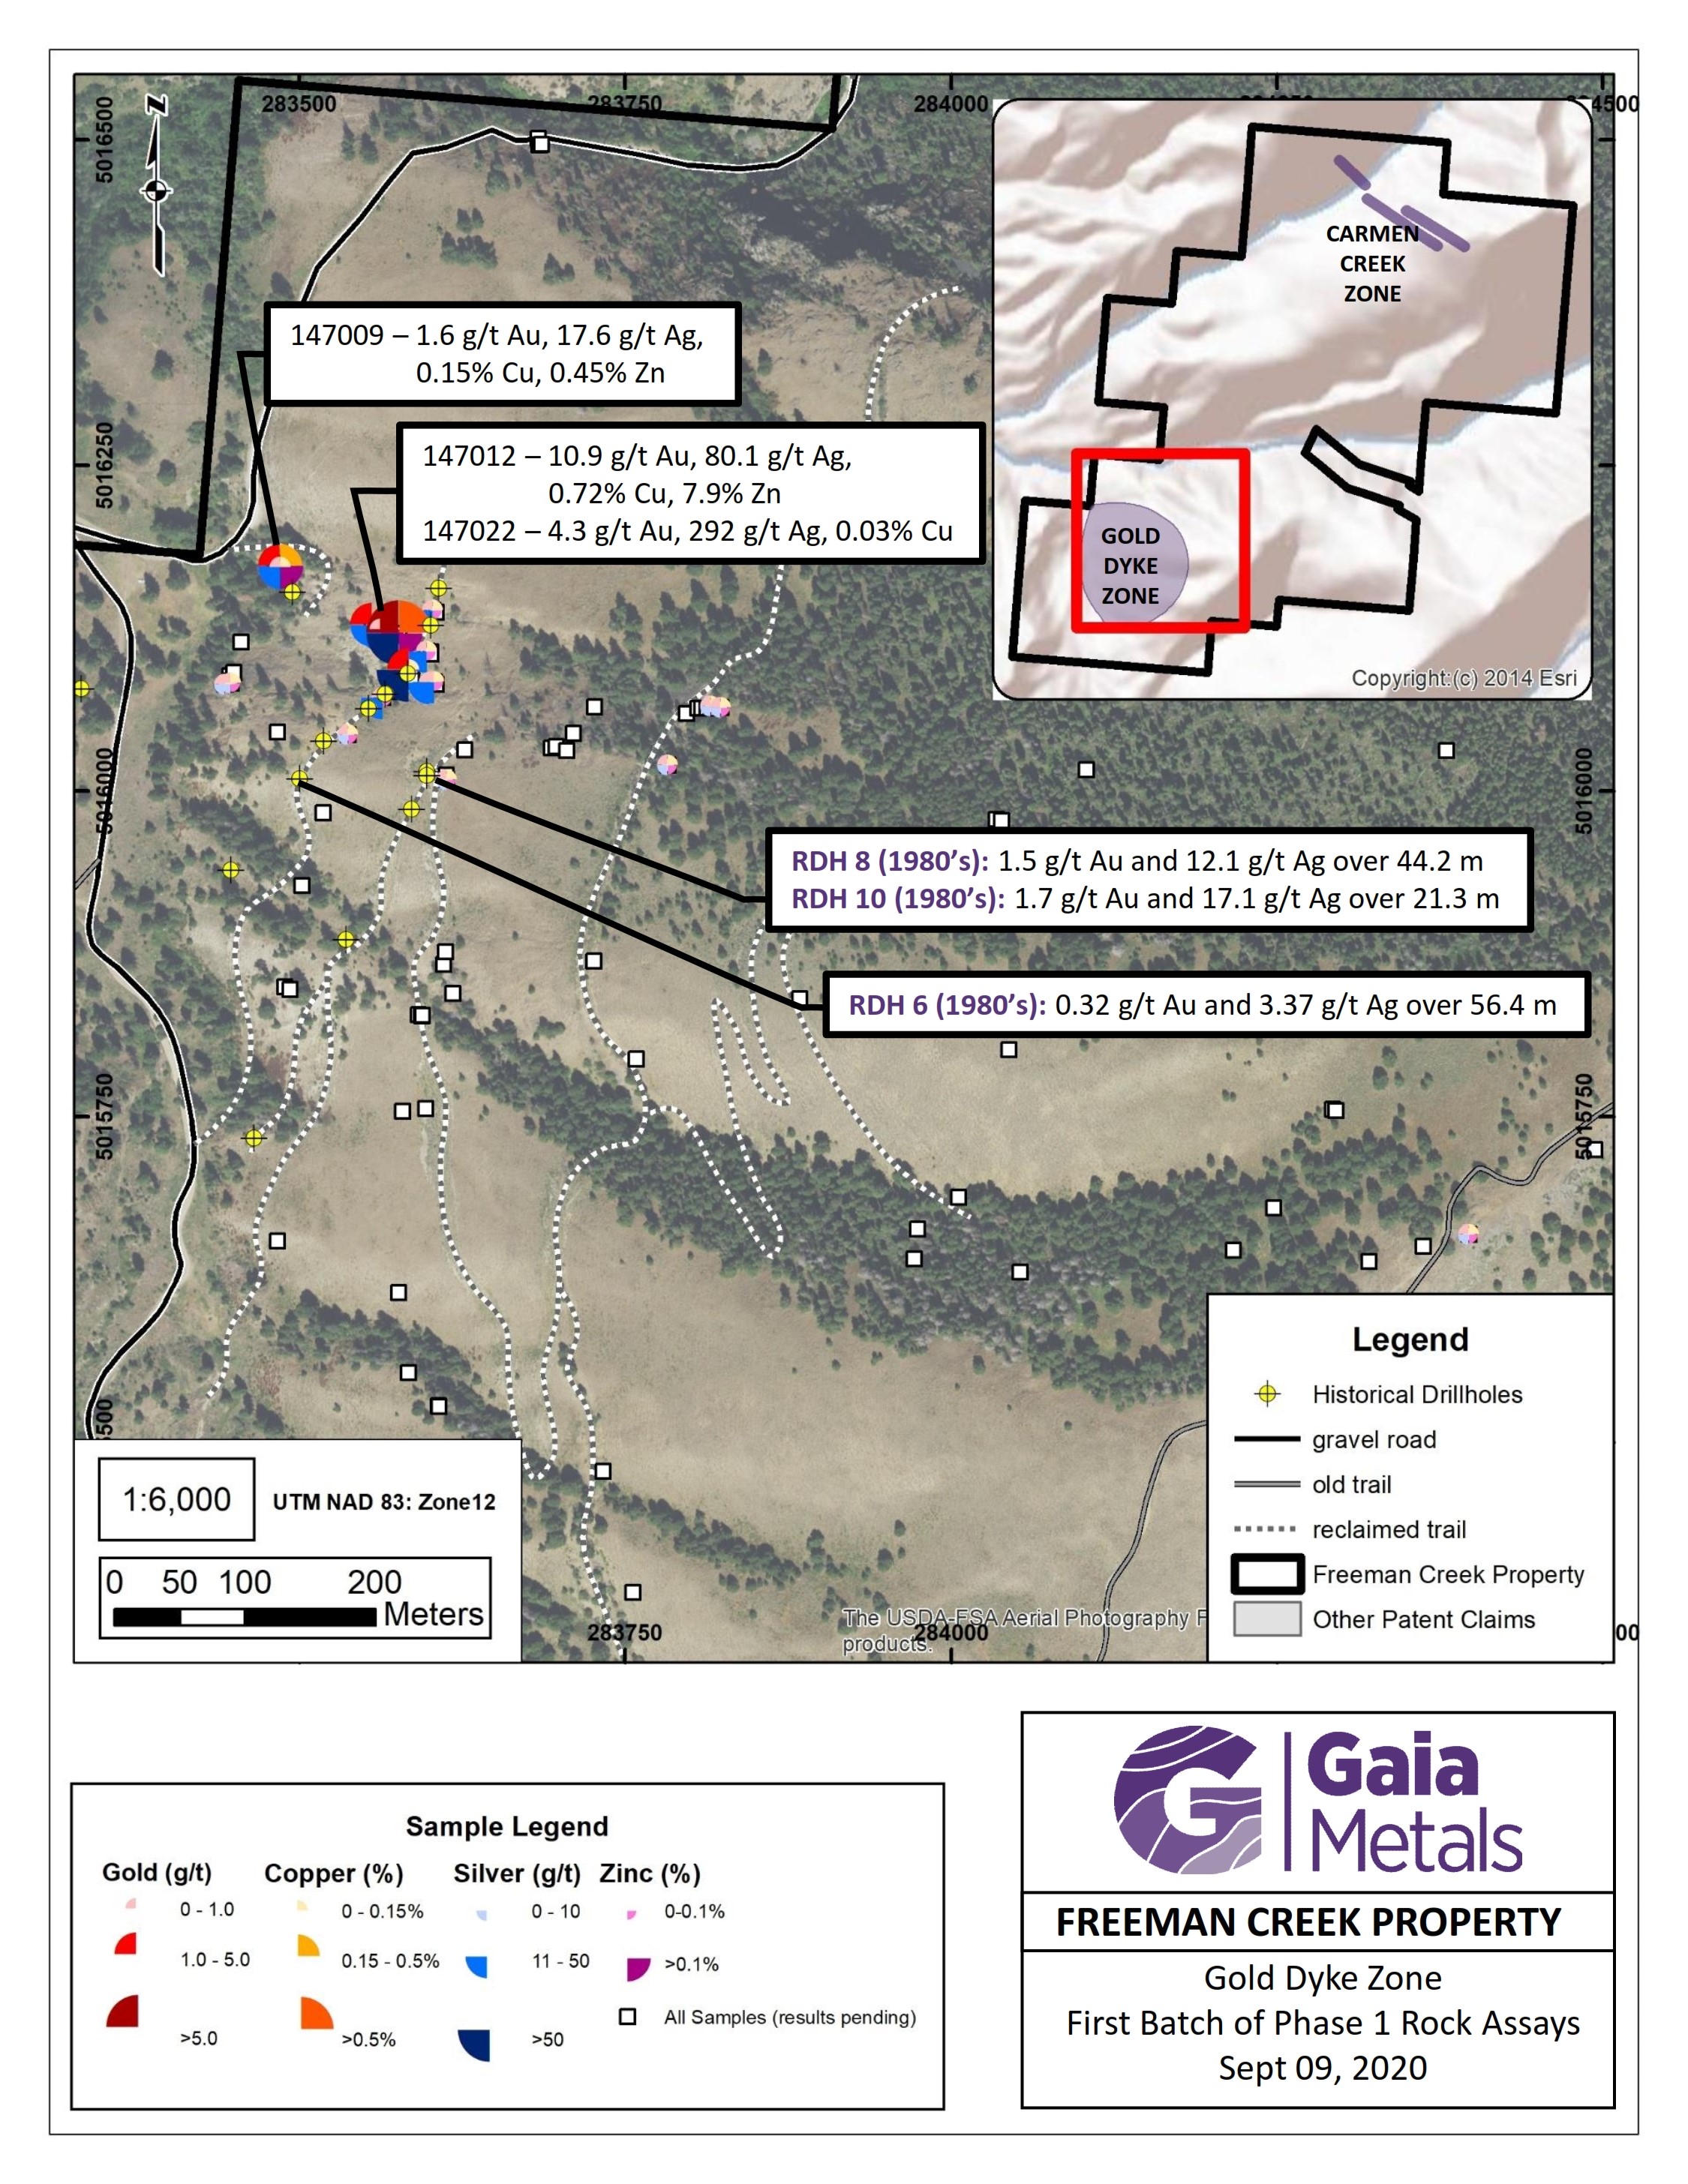 Gaia Metals Corp., Thursday, September 10, 2020, Press release picture